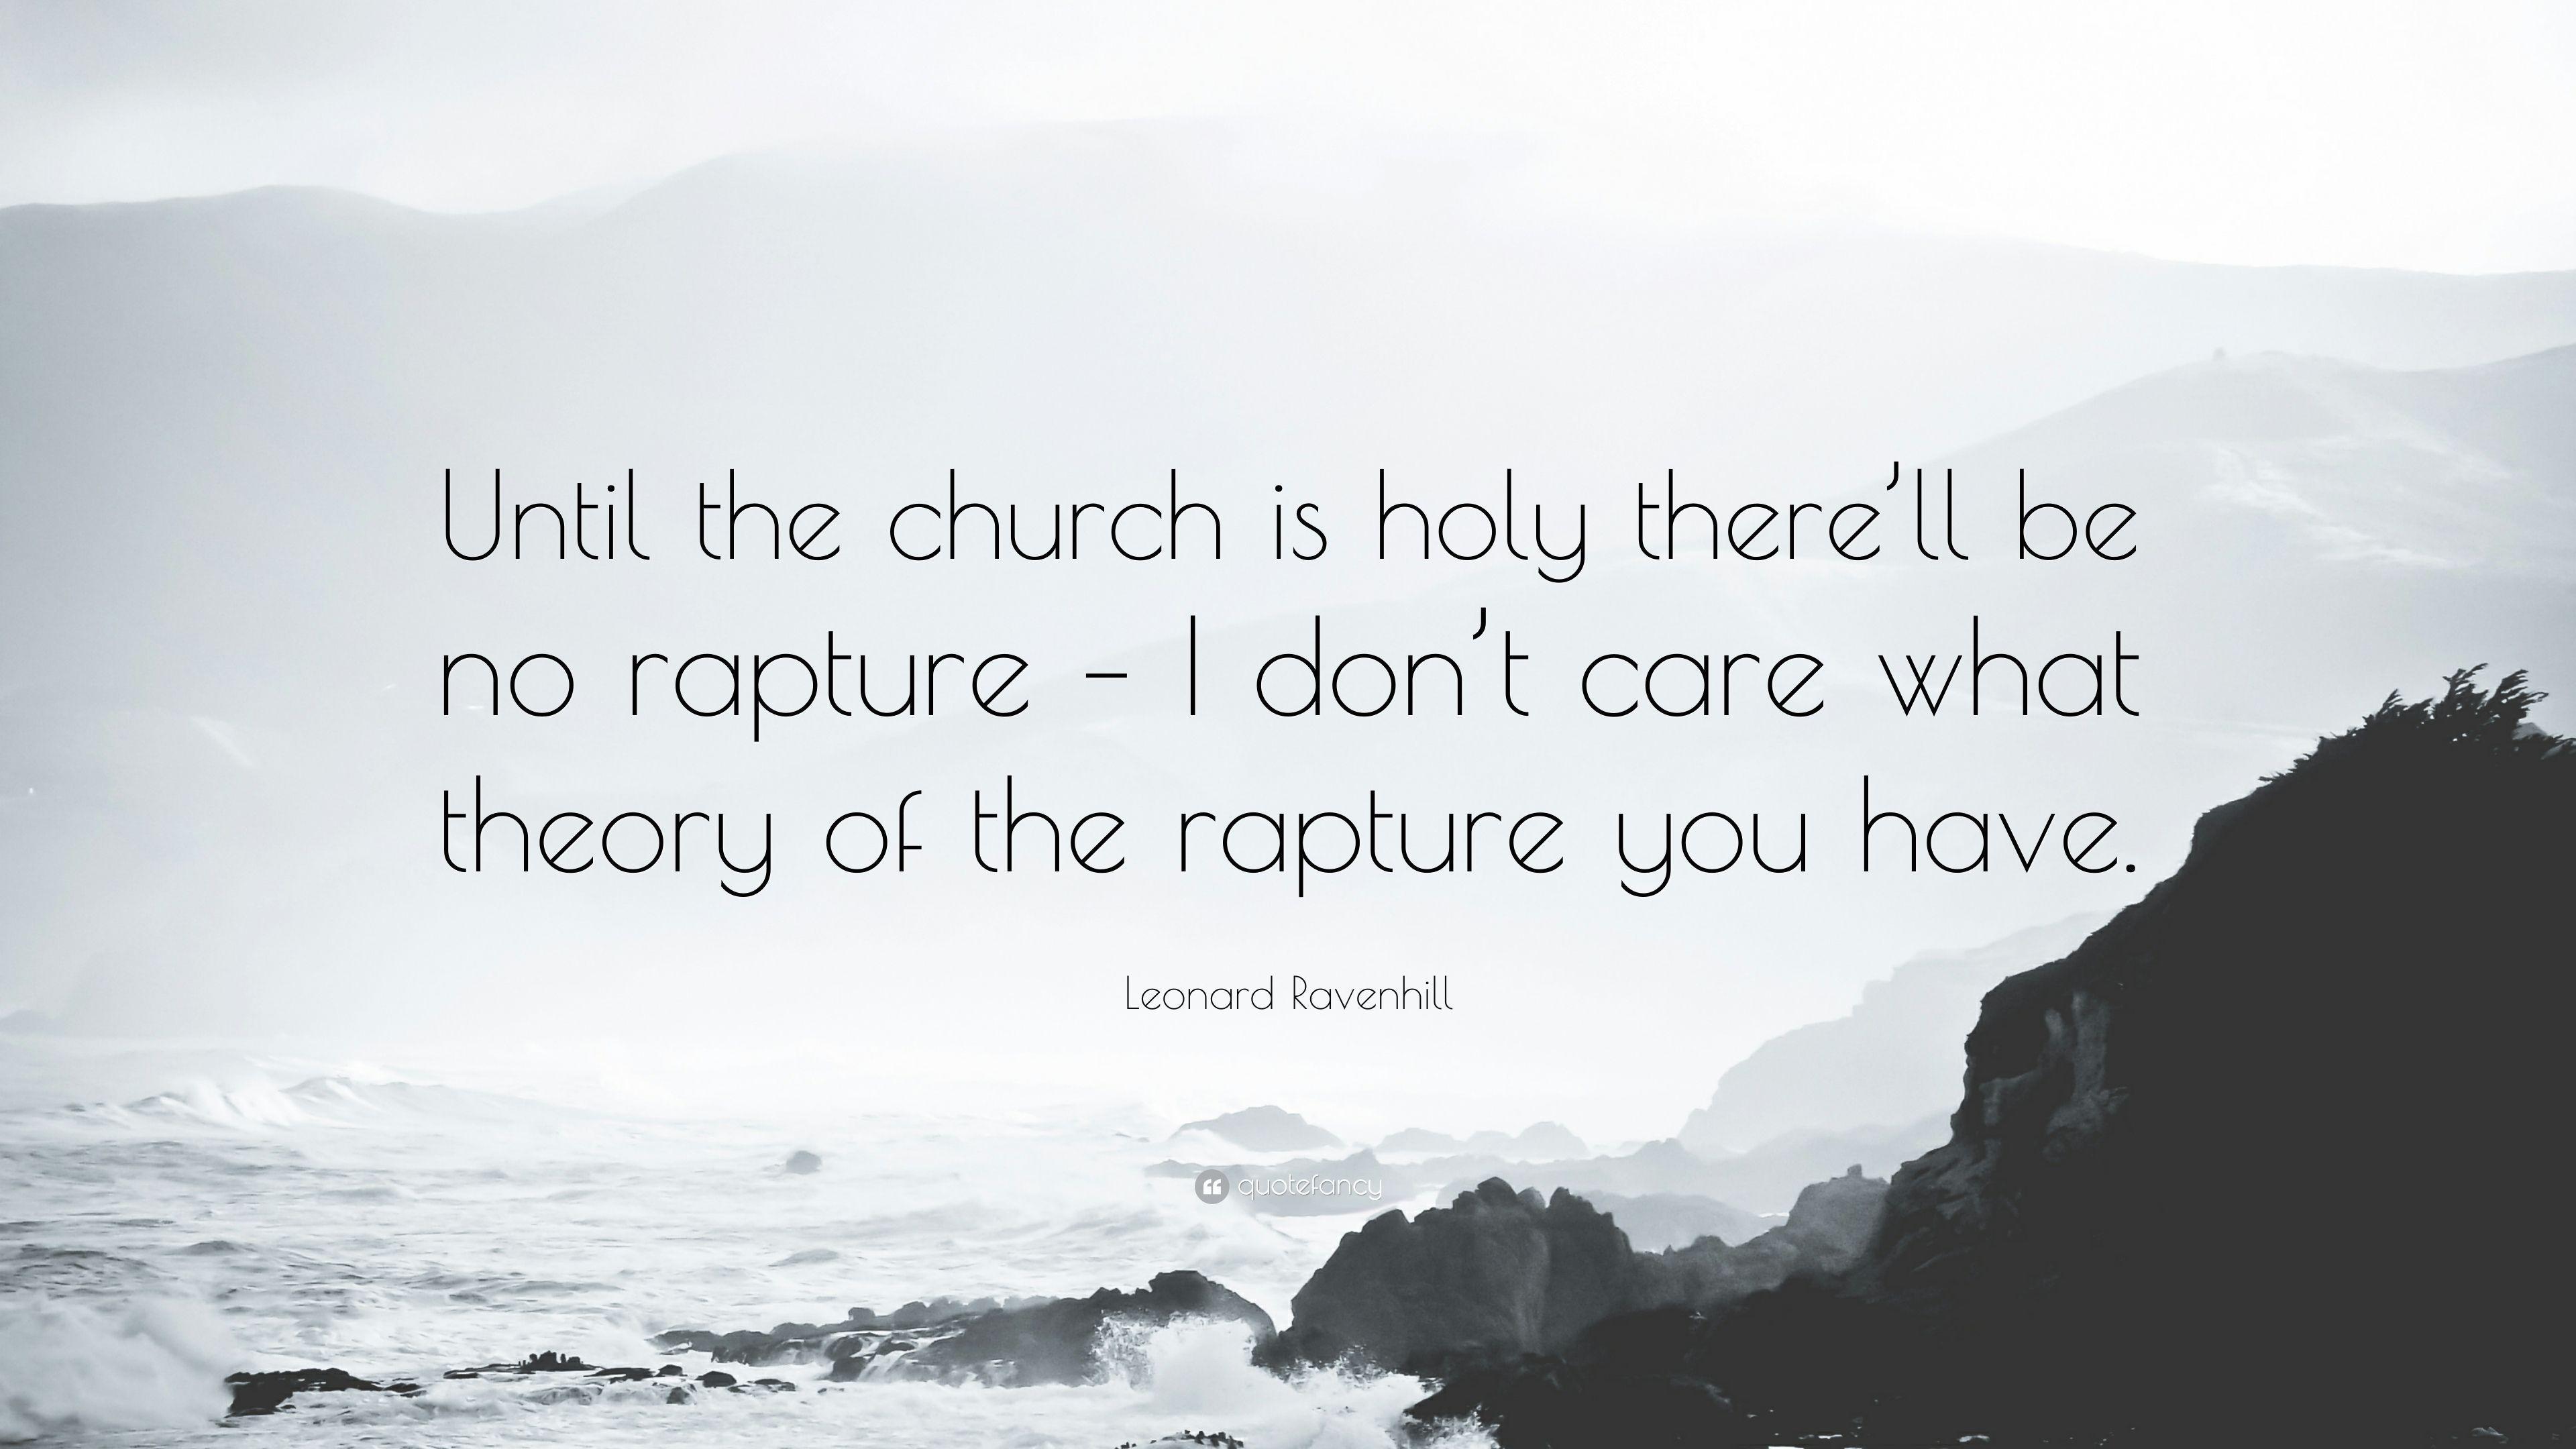 Leonard Ravenhill Quote: “Until the church is holy there'll be no